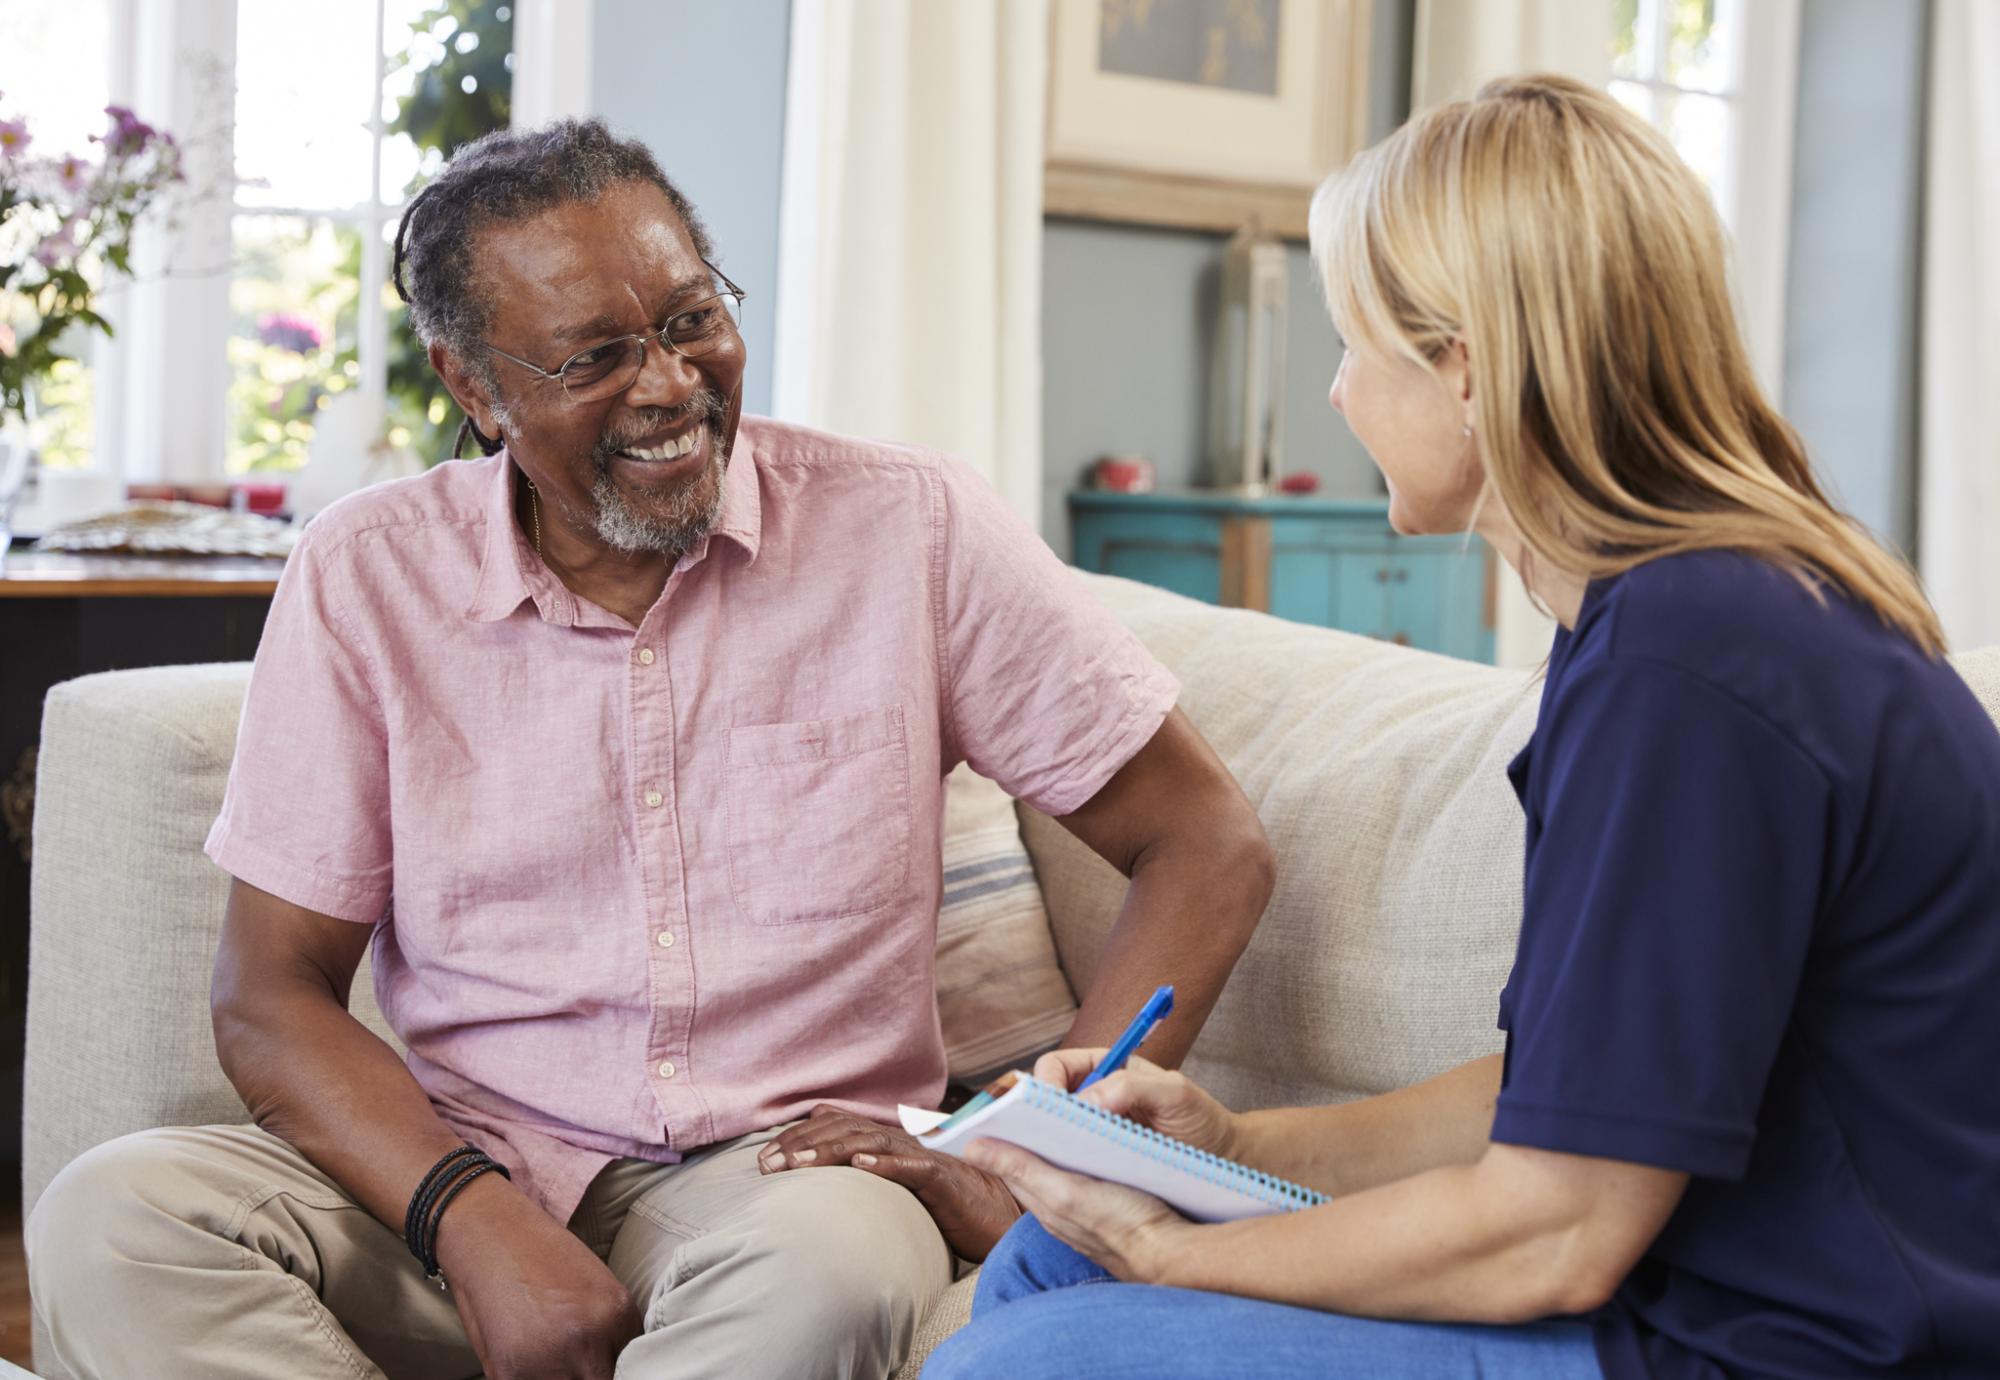 Female support worker talking with older male resident